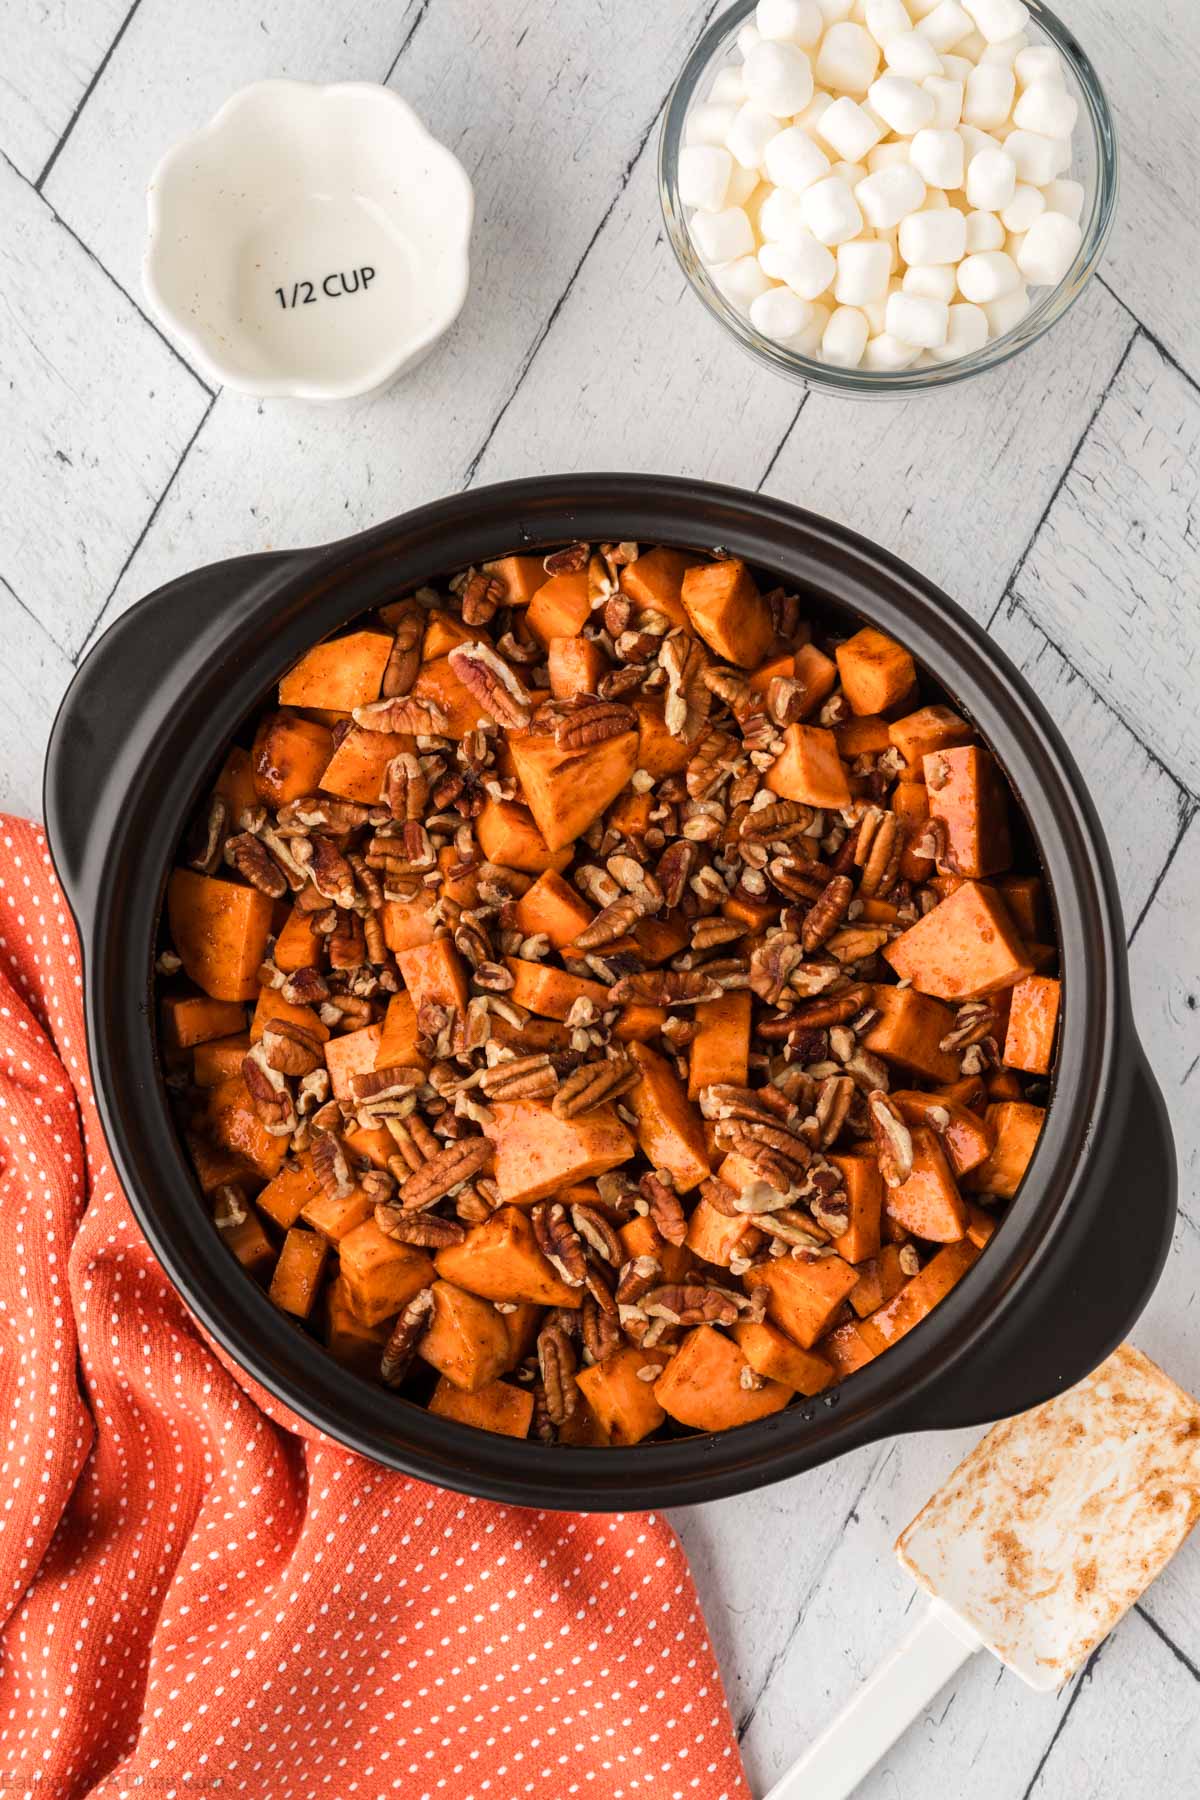 The chopped pecans poured on top of the sweet potatoes in the crock pot.  